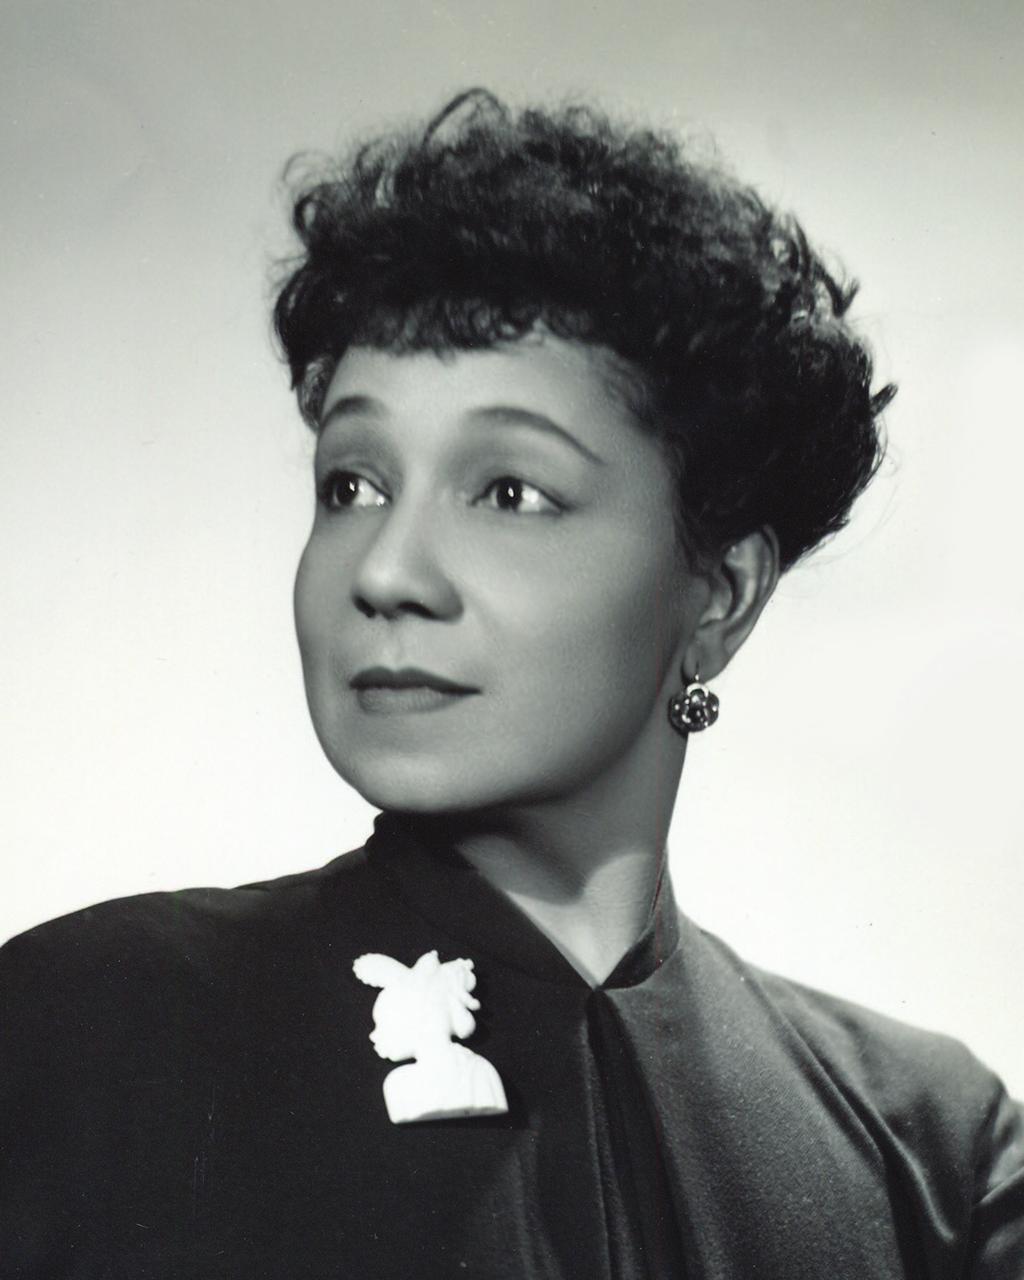 unday Monday Tuesday Wednesday Thursday Friday Saturda 1 1 1 Etta Moten Barnett 101-0 An actress and singer closely identified with the role of Bess in the opera Porgy and Bess, Etta Moten Barnett